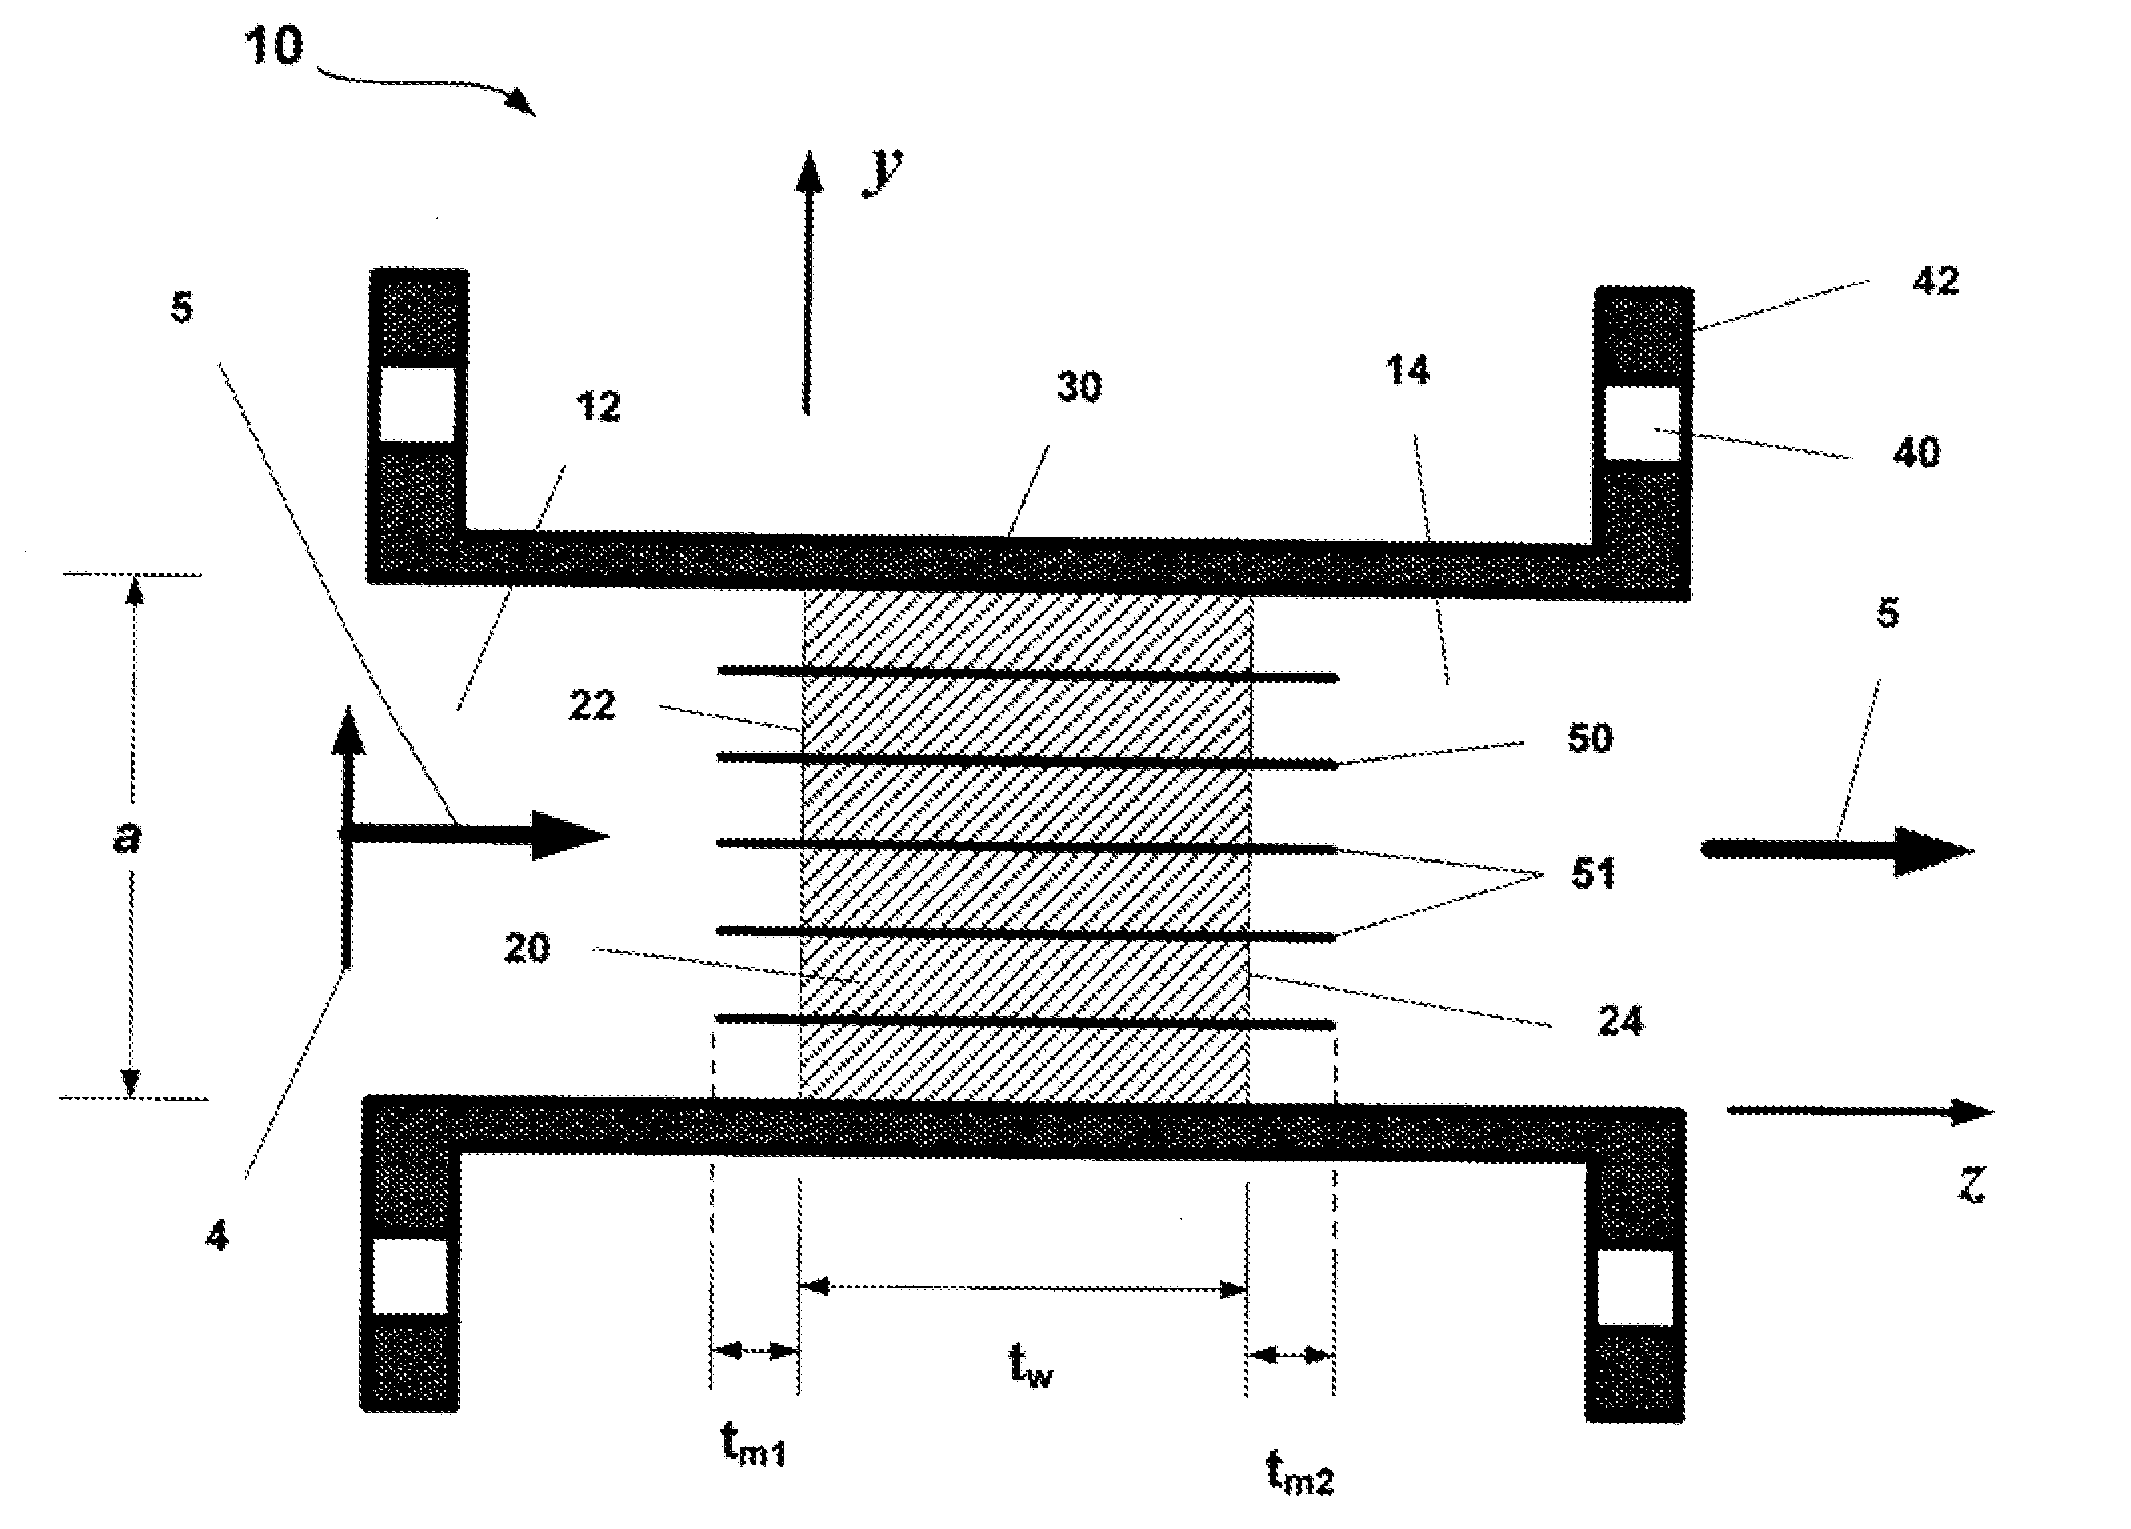 High Peak and Average Power-Capable Microwave Window for Rectangular Waveguide